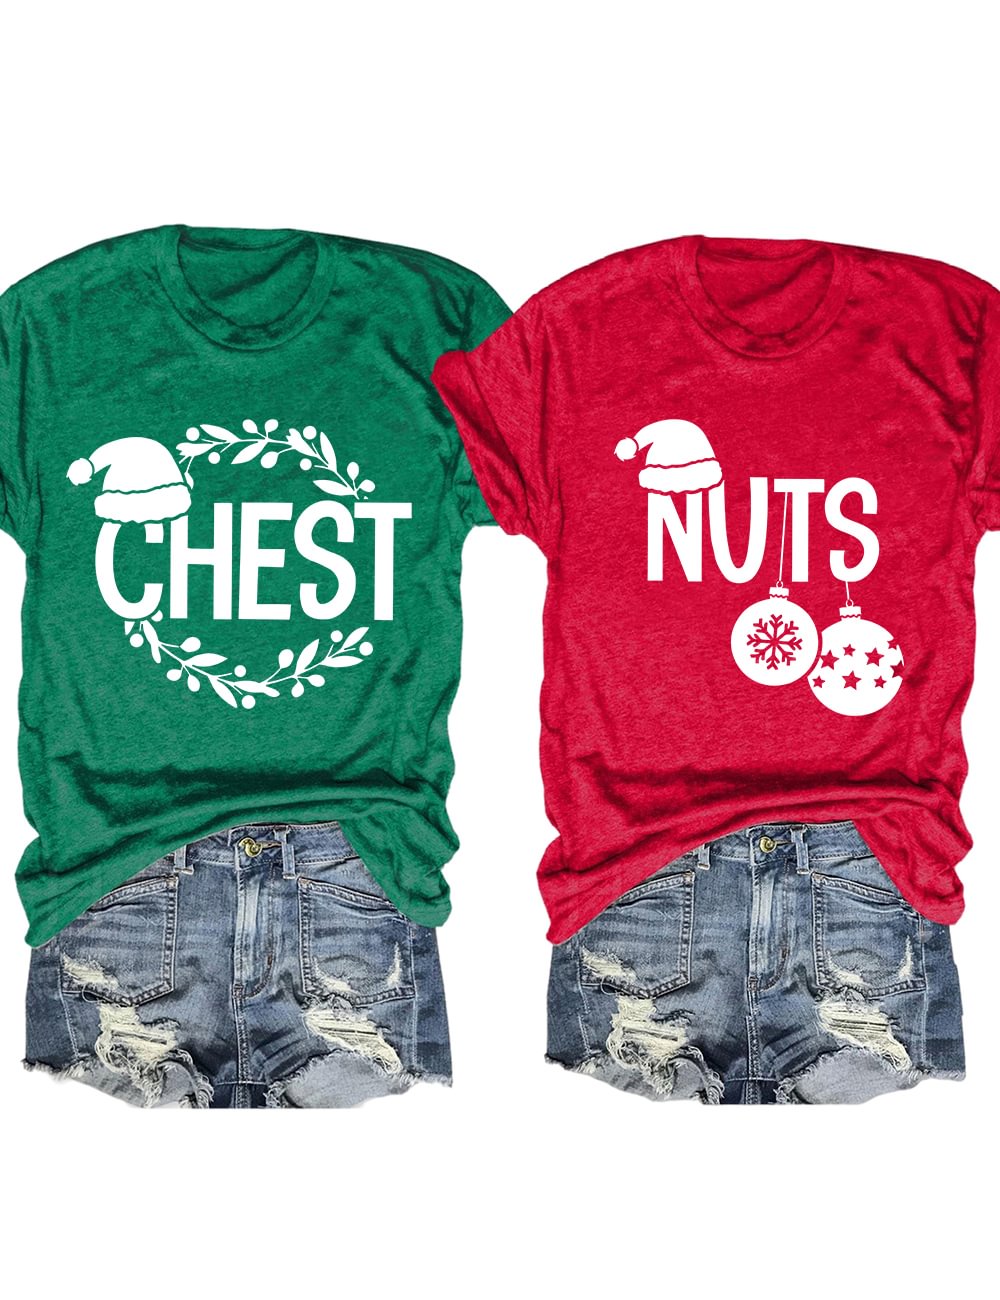 Chest/Nuts Christmas Matching T-Shirt